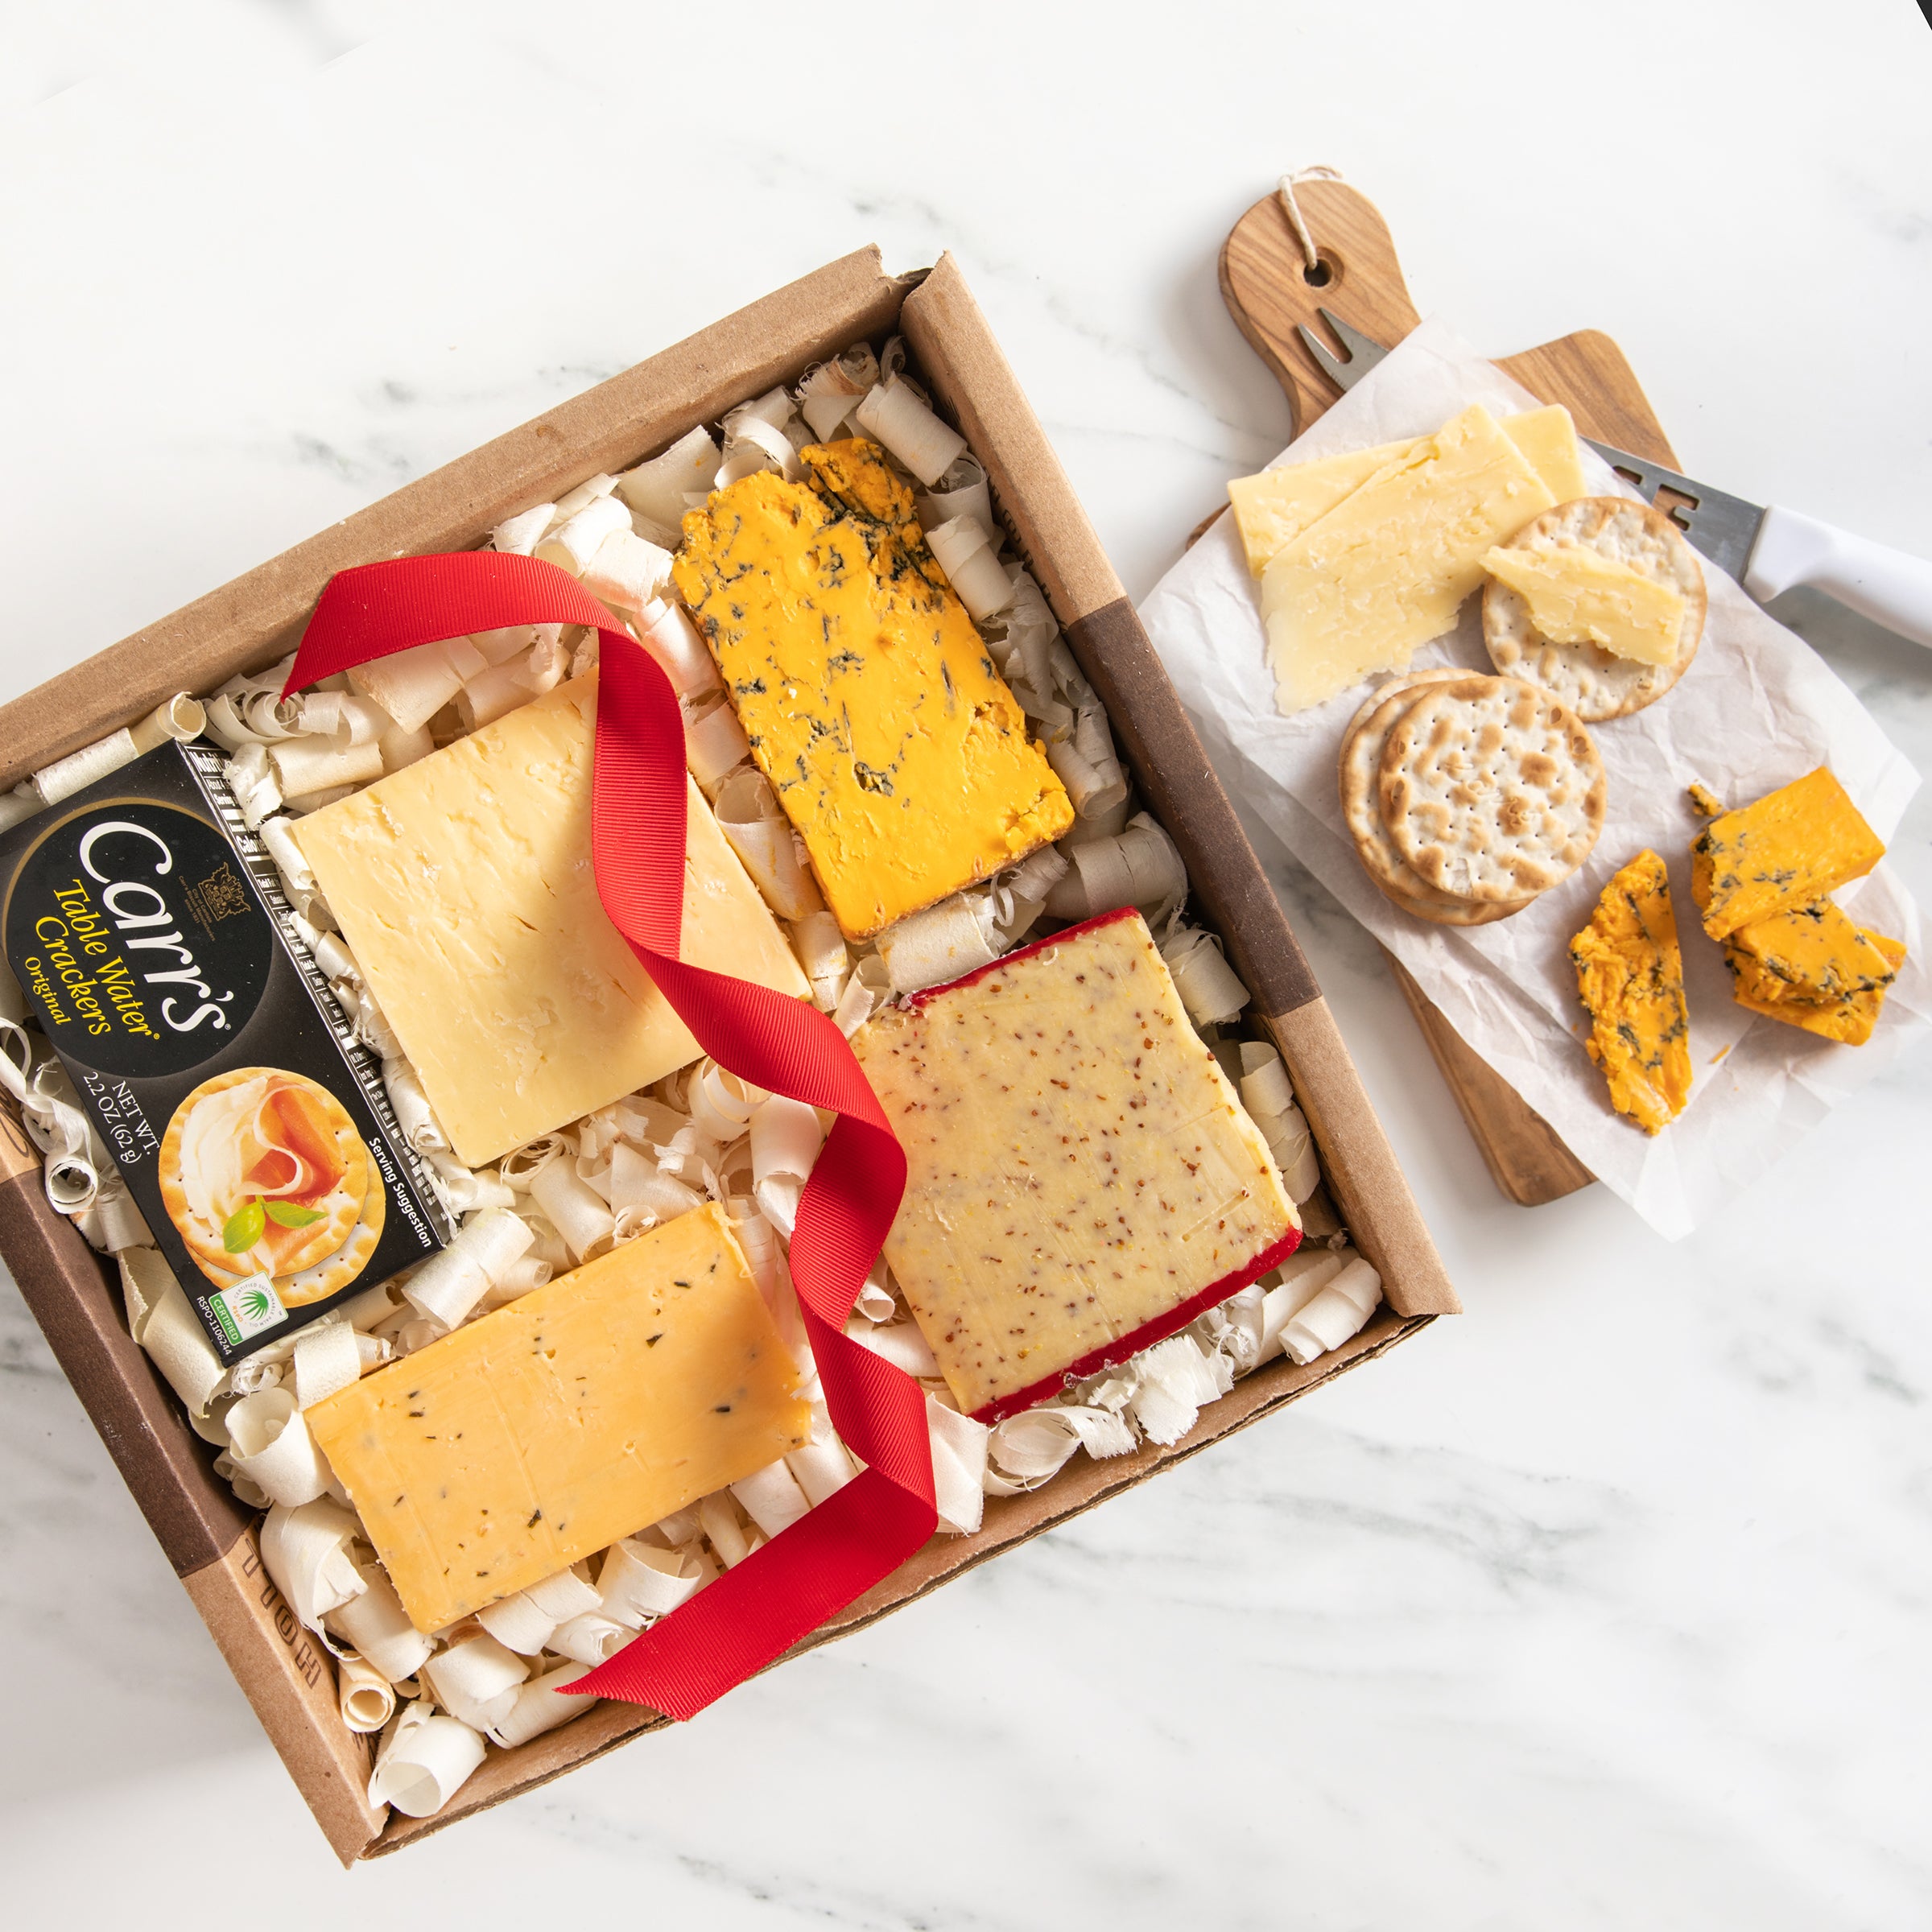 Pub Cheese Assortment Gift Box_igourmet_Cheese Gifts_Gift Basket, Boxes, Crates and Kits